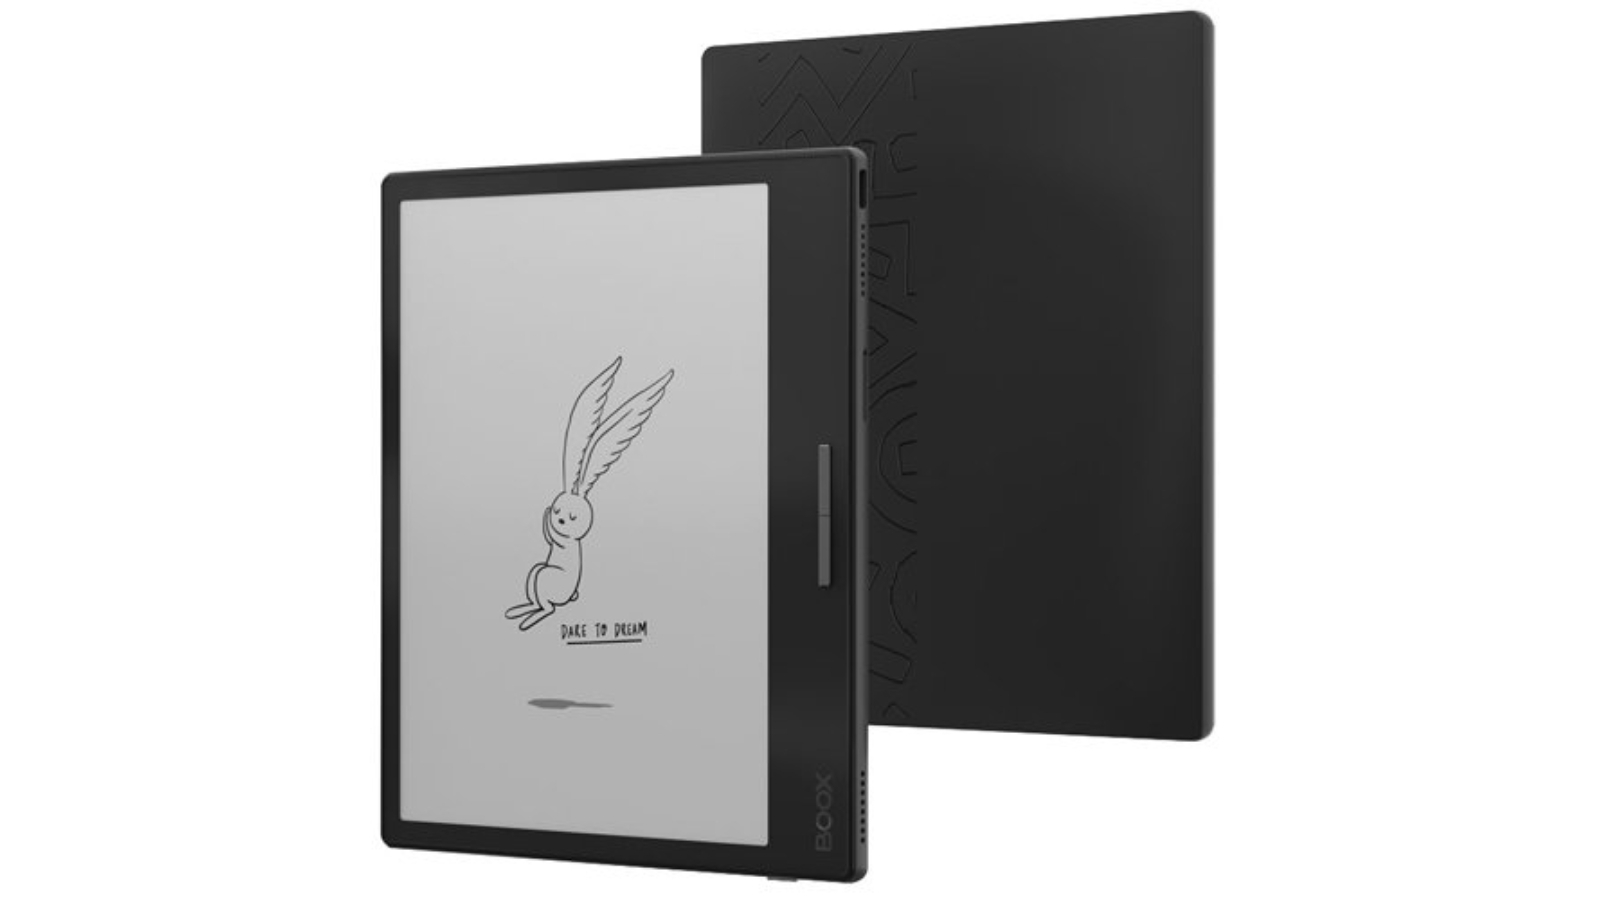 ONYX BOOX Page 7 E-Ink eReader